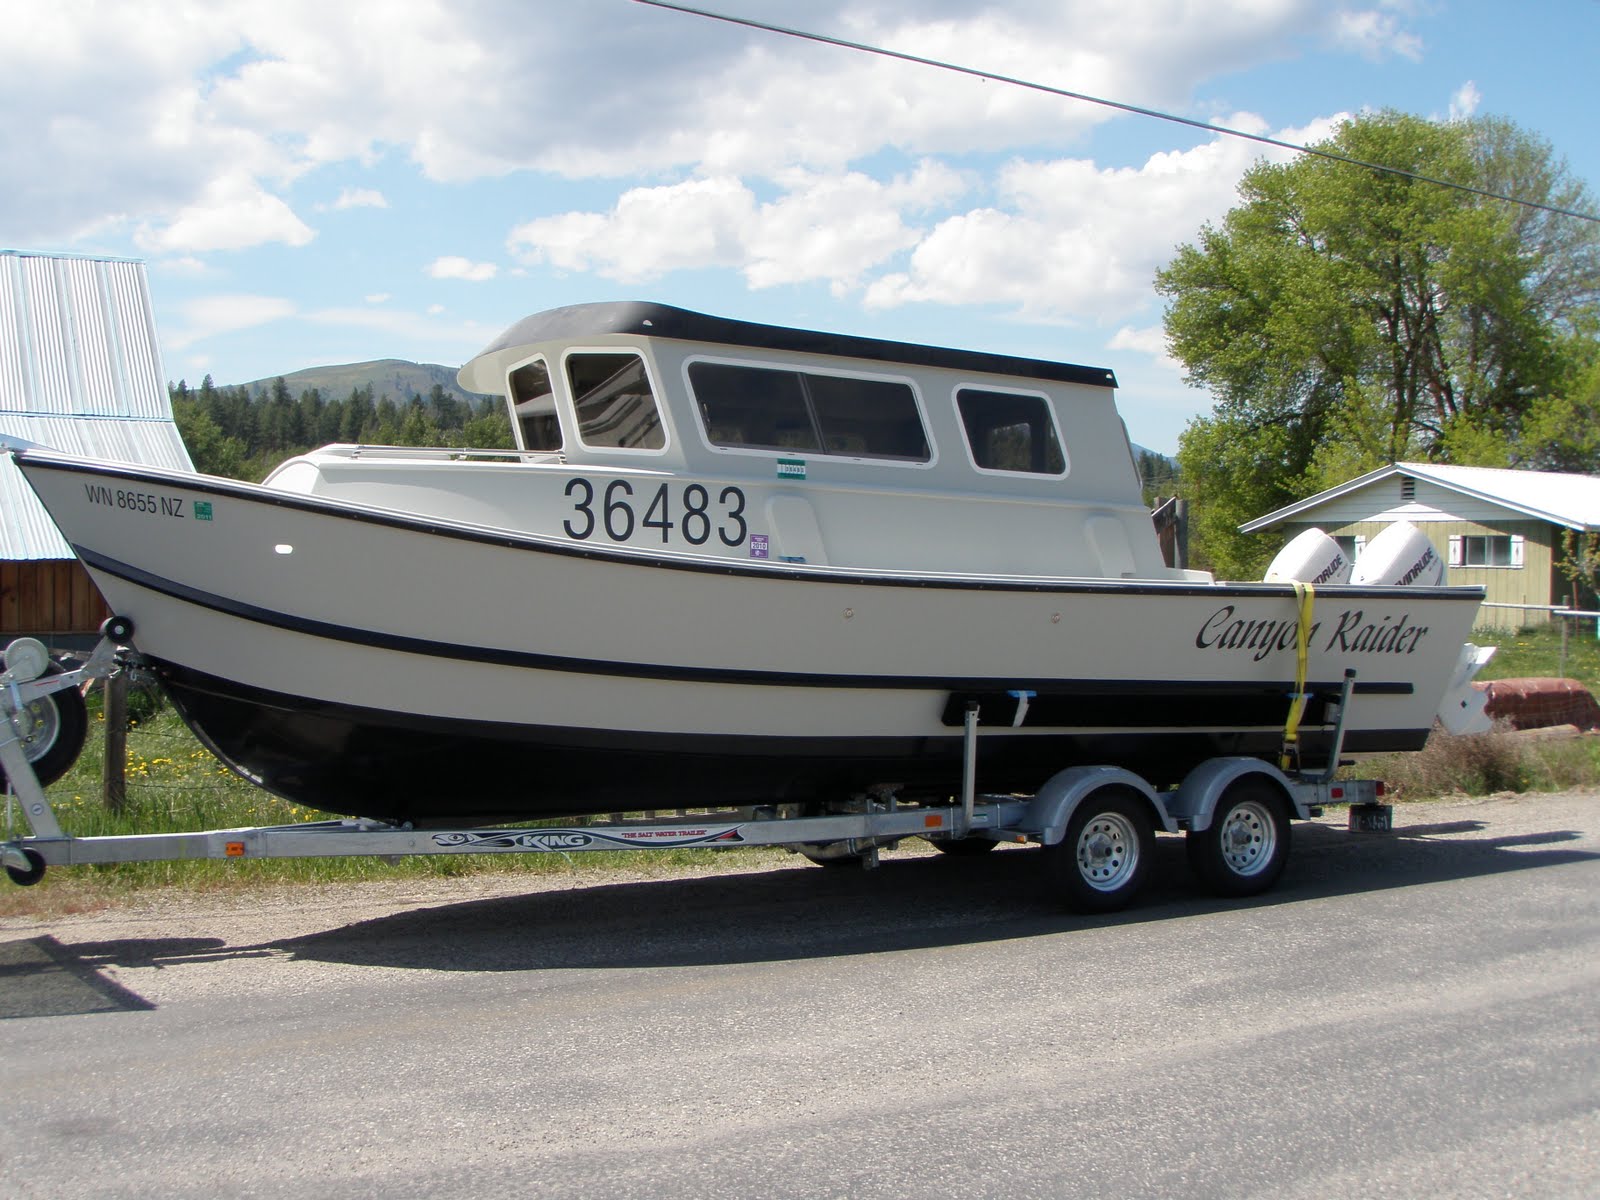 Itching For Fun: Just in! Photos of two Tolman Skiffs